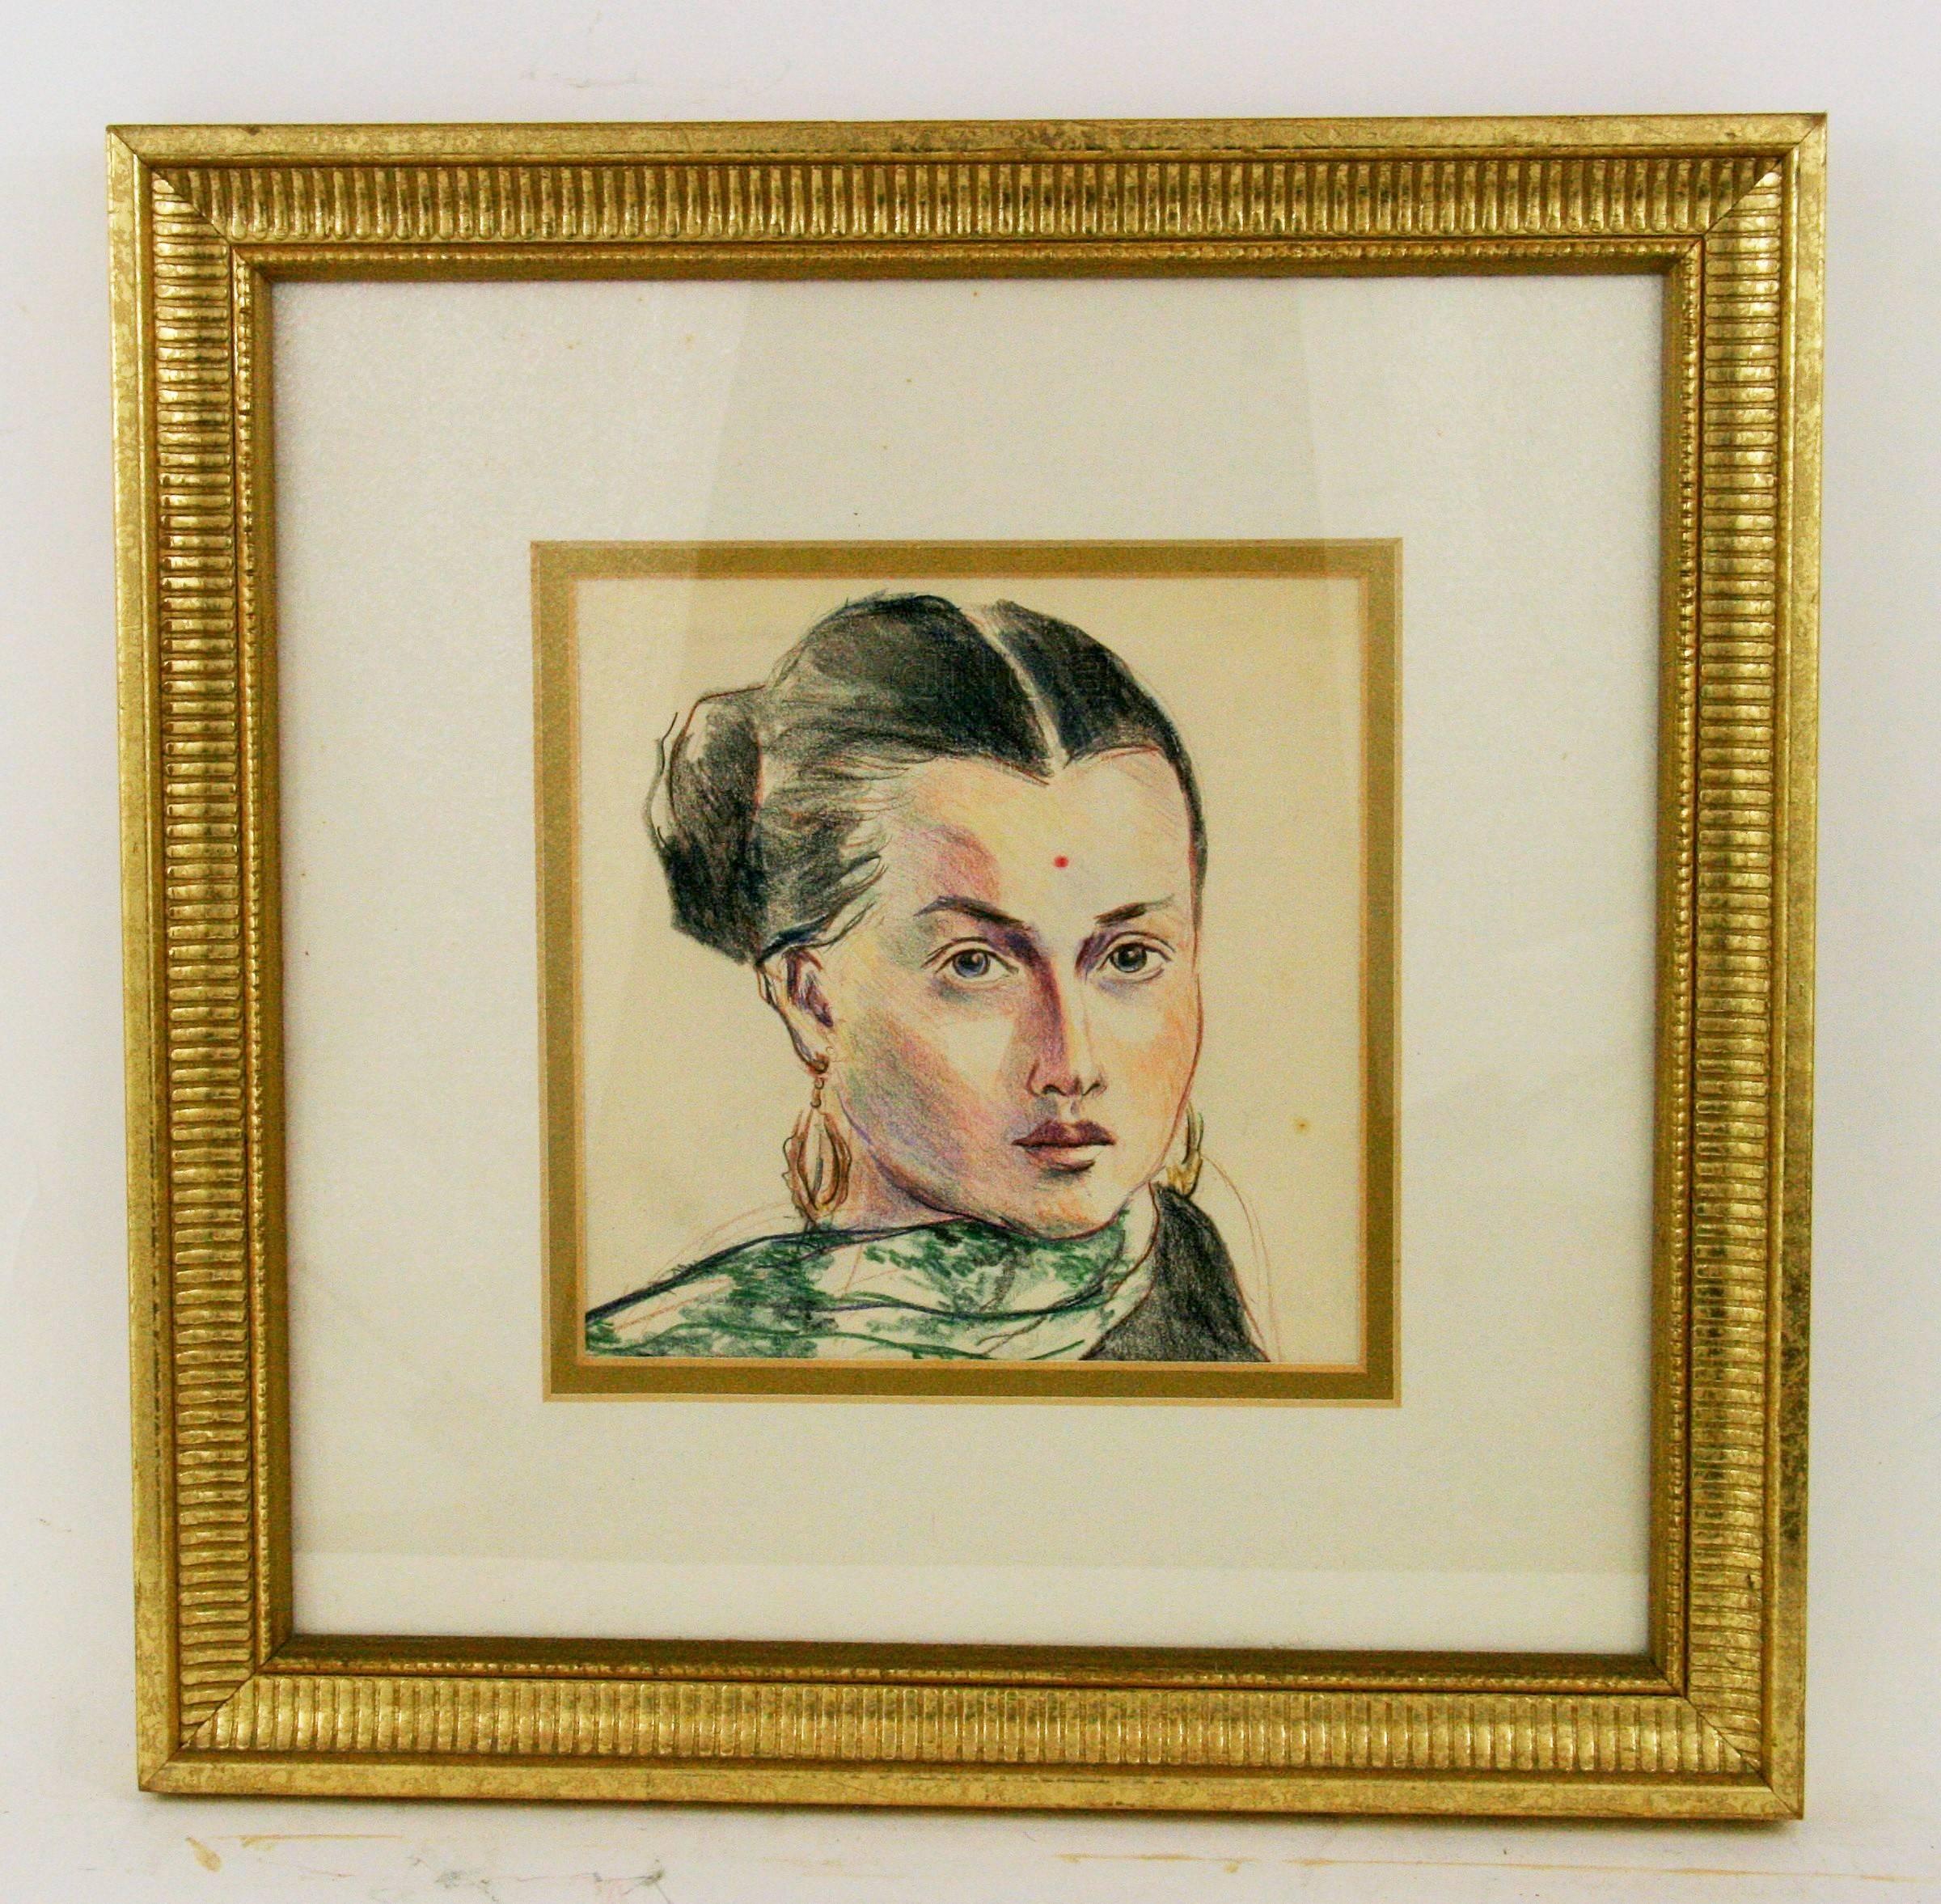 5-2621, a pastel-graphite on paper woman portrait.
Signed lower left by Margot.
Measures: Image size 7.5 H x 5.5 W set in a custom mat and gilt frame.
  